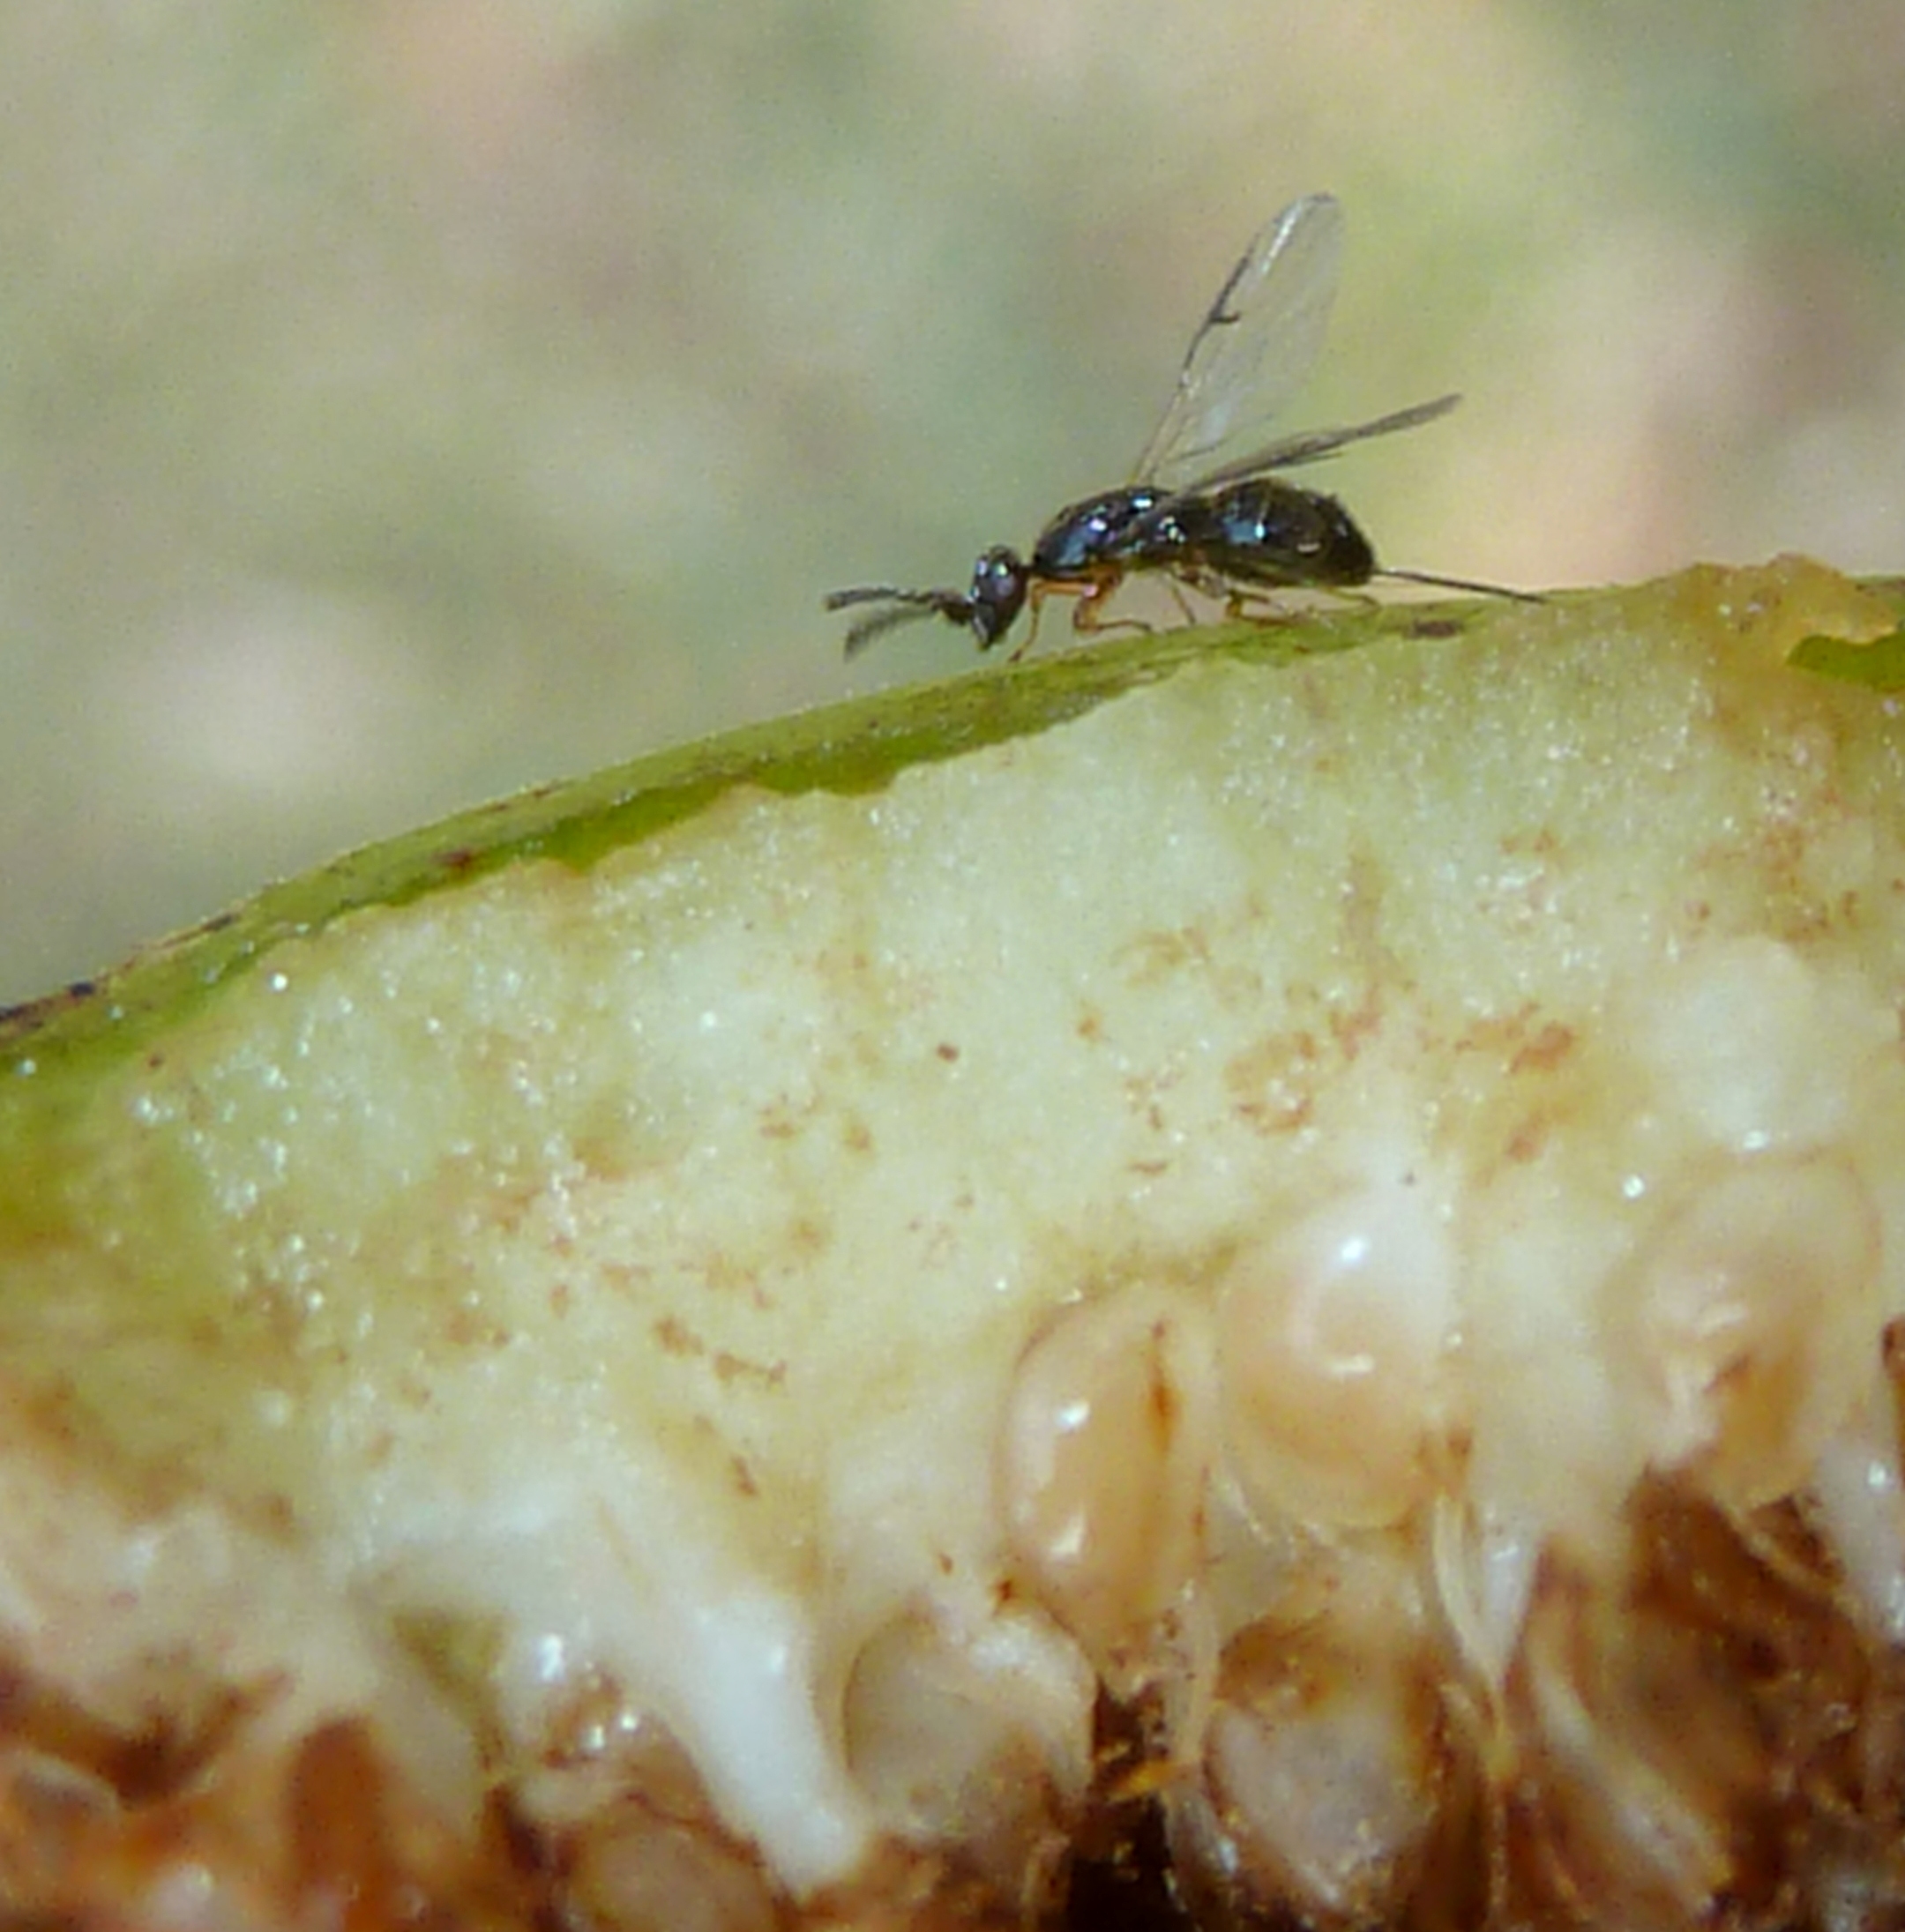 The Tiny Fig Wasp